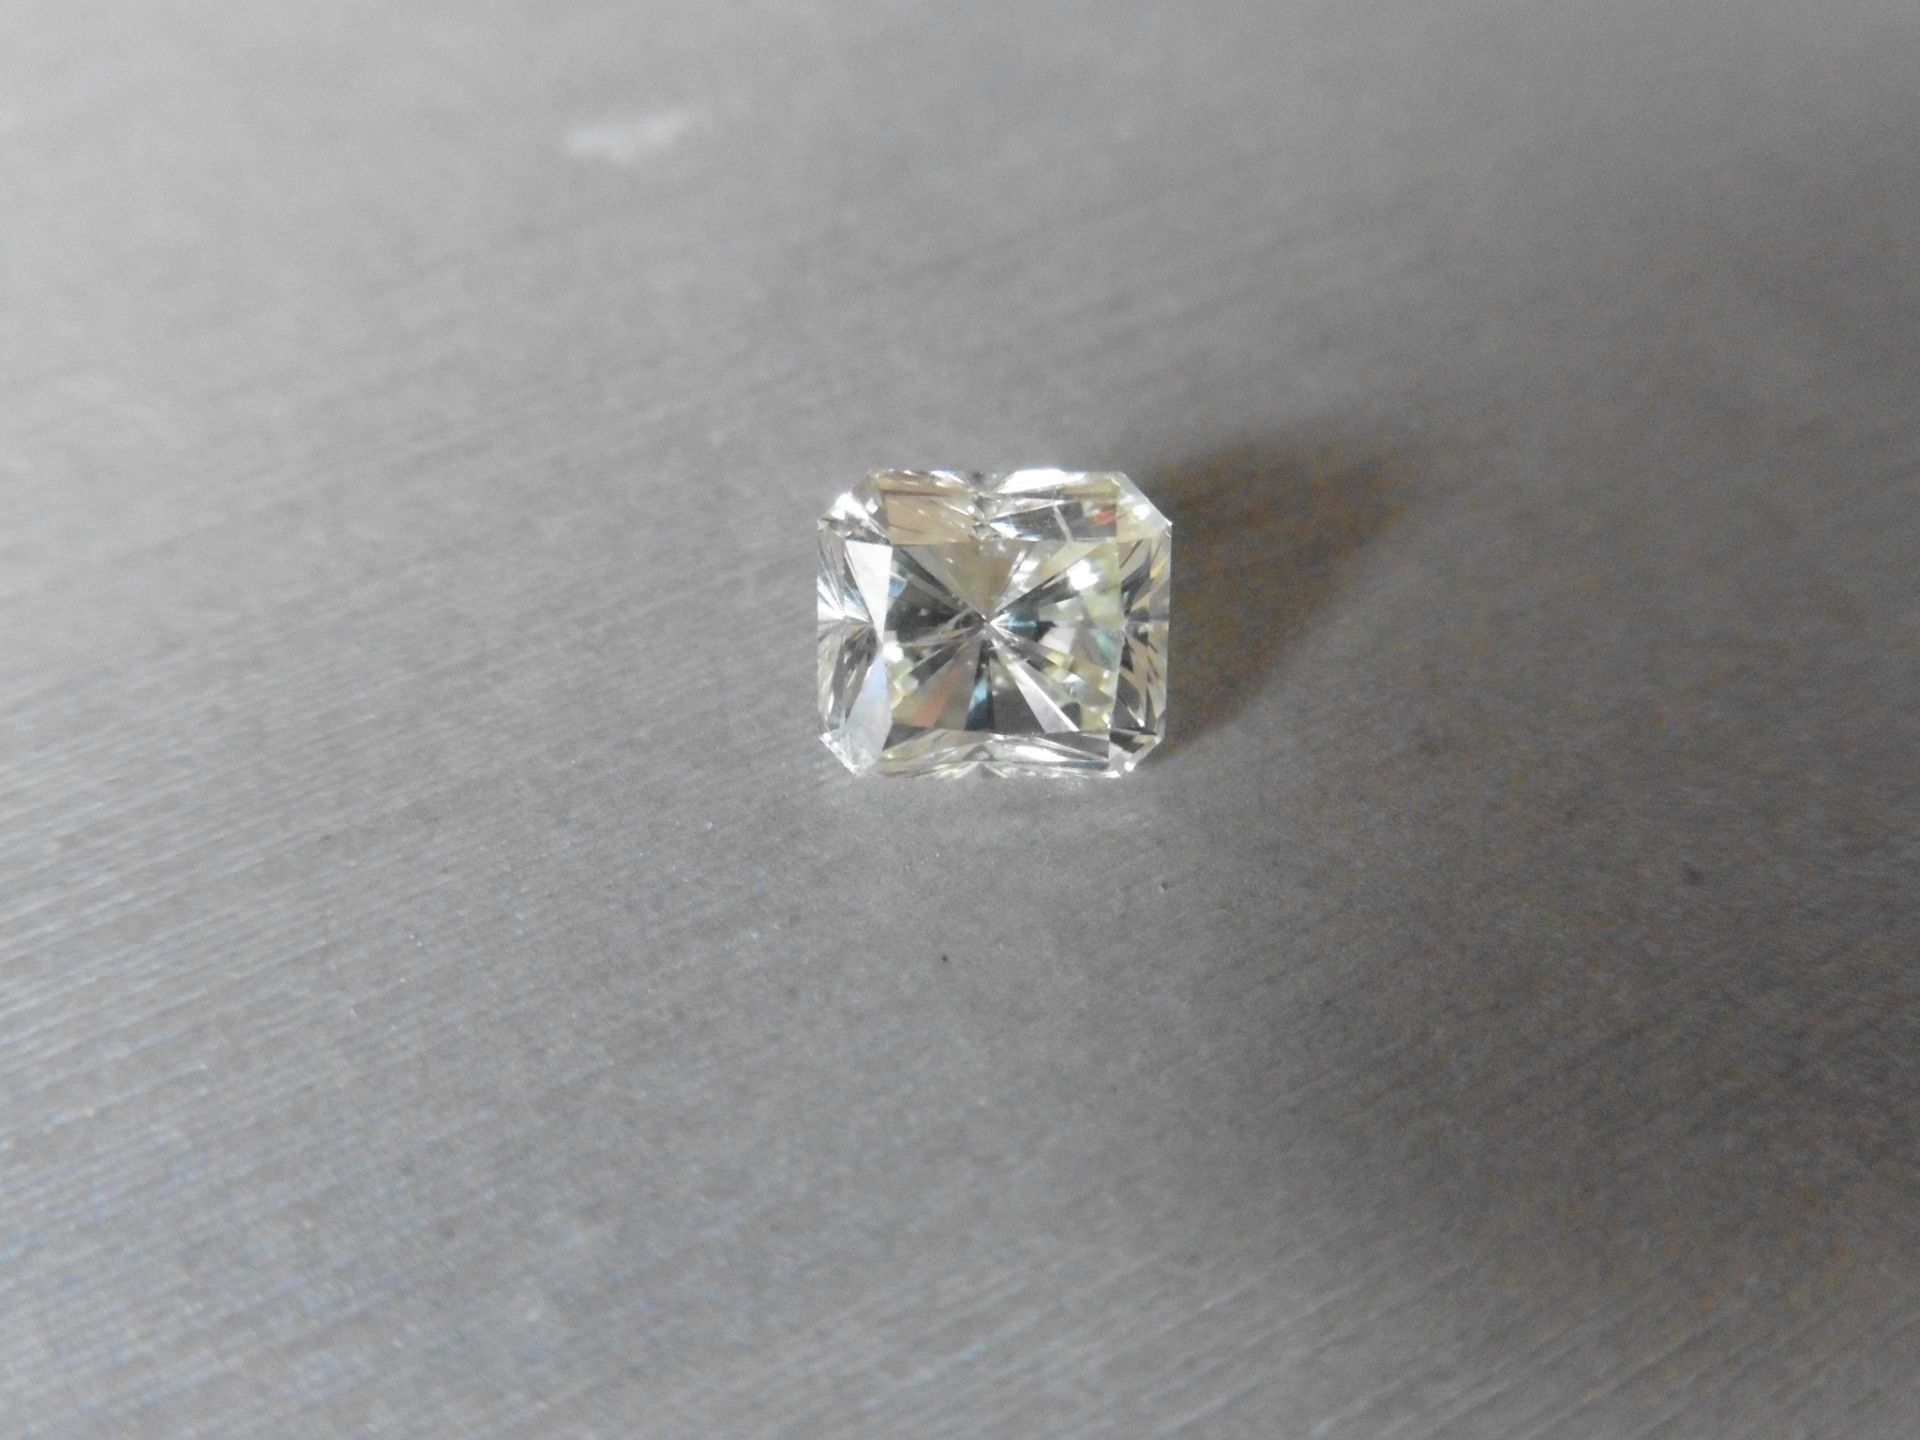 2.65ct single radiant cut diamond. Measures 7.82 x 6.94 x 5.95mm. K-L colour and Si clarity. No